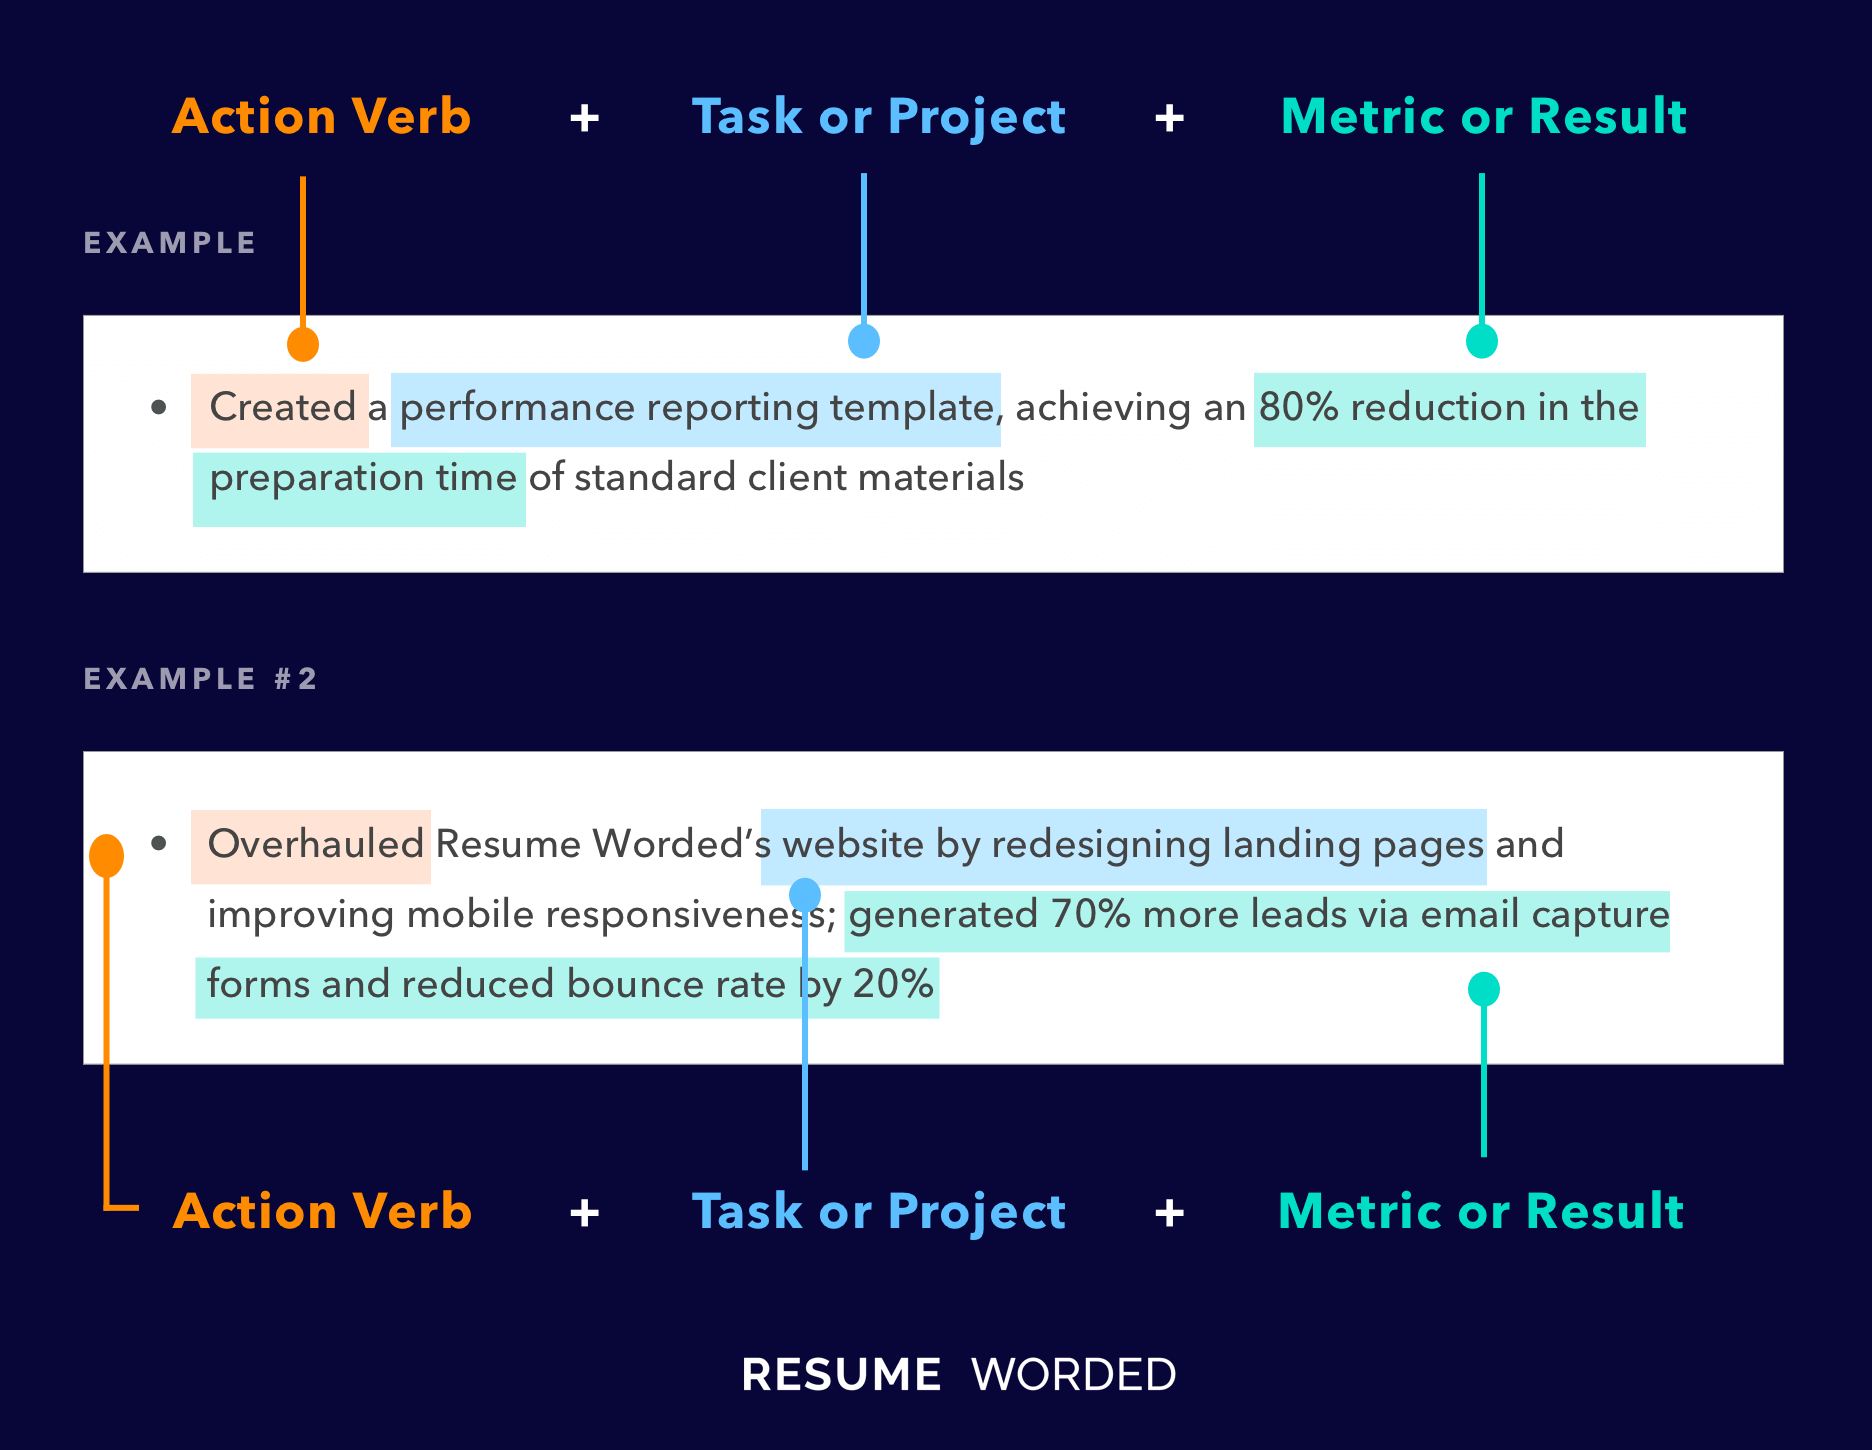 Strong action verbs related to data scientists - Data Scientist Resume